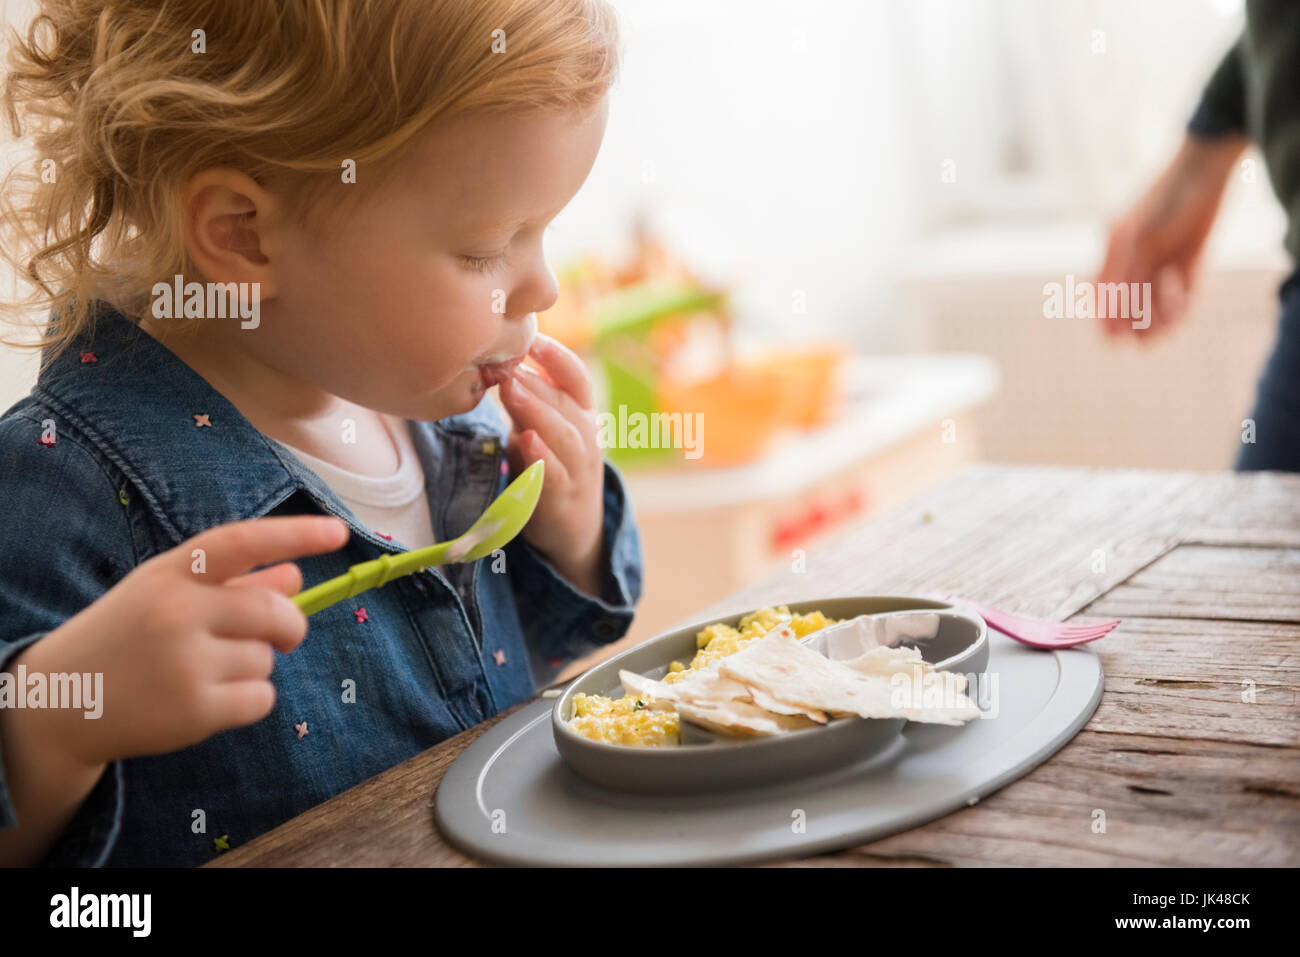 Caucasian girl eating with fingers and spoon Stock Photo